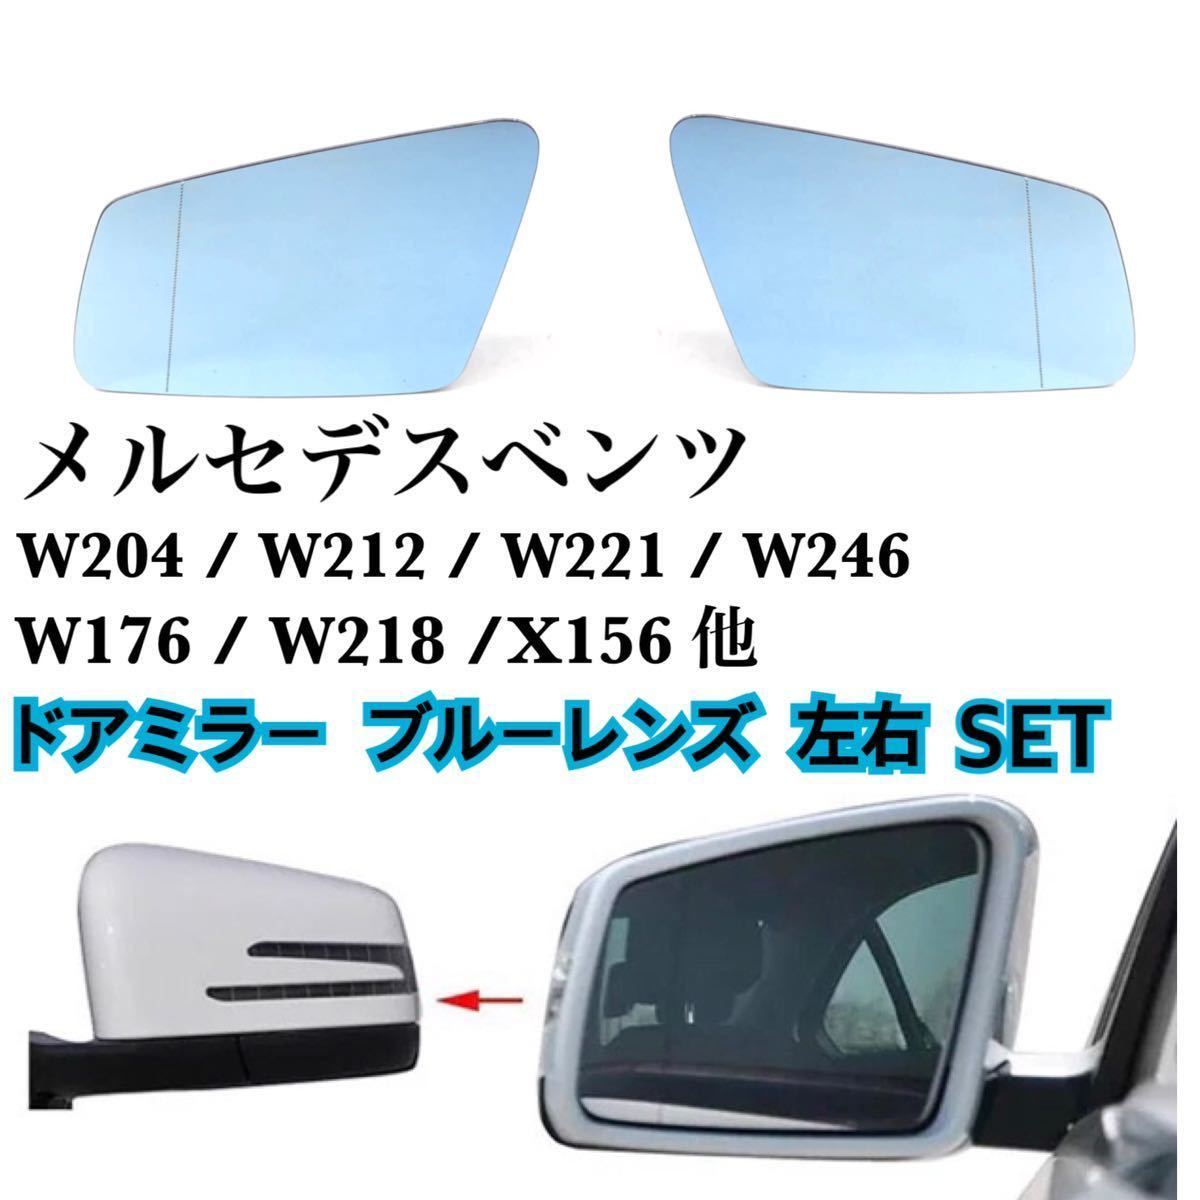  immediate payment * postage included * Benz door mirror blue lens left right set glass blue W176 W204 W221 W212 W216 W218 W246 original exchange heated specification 